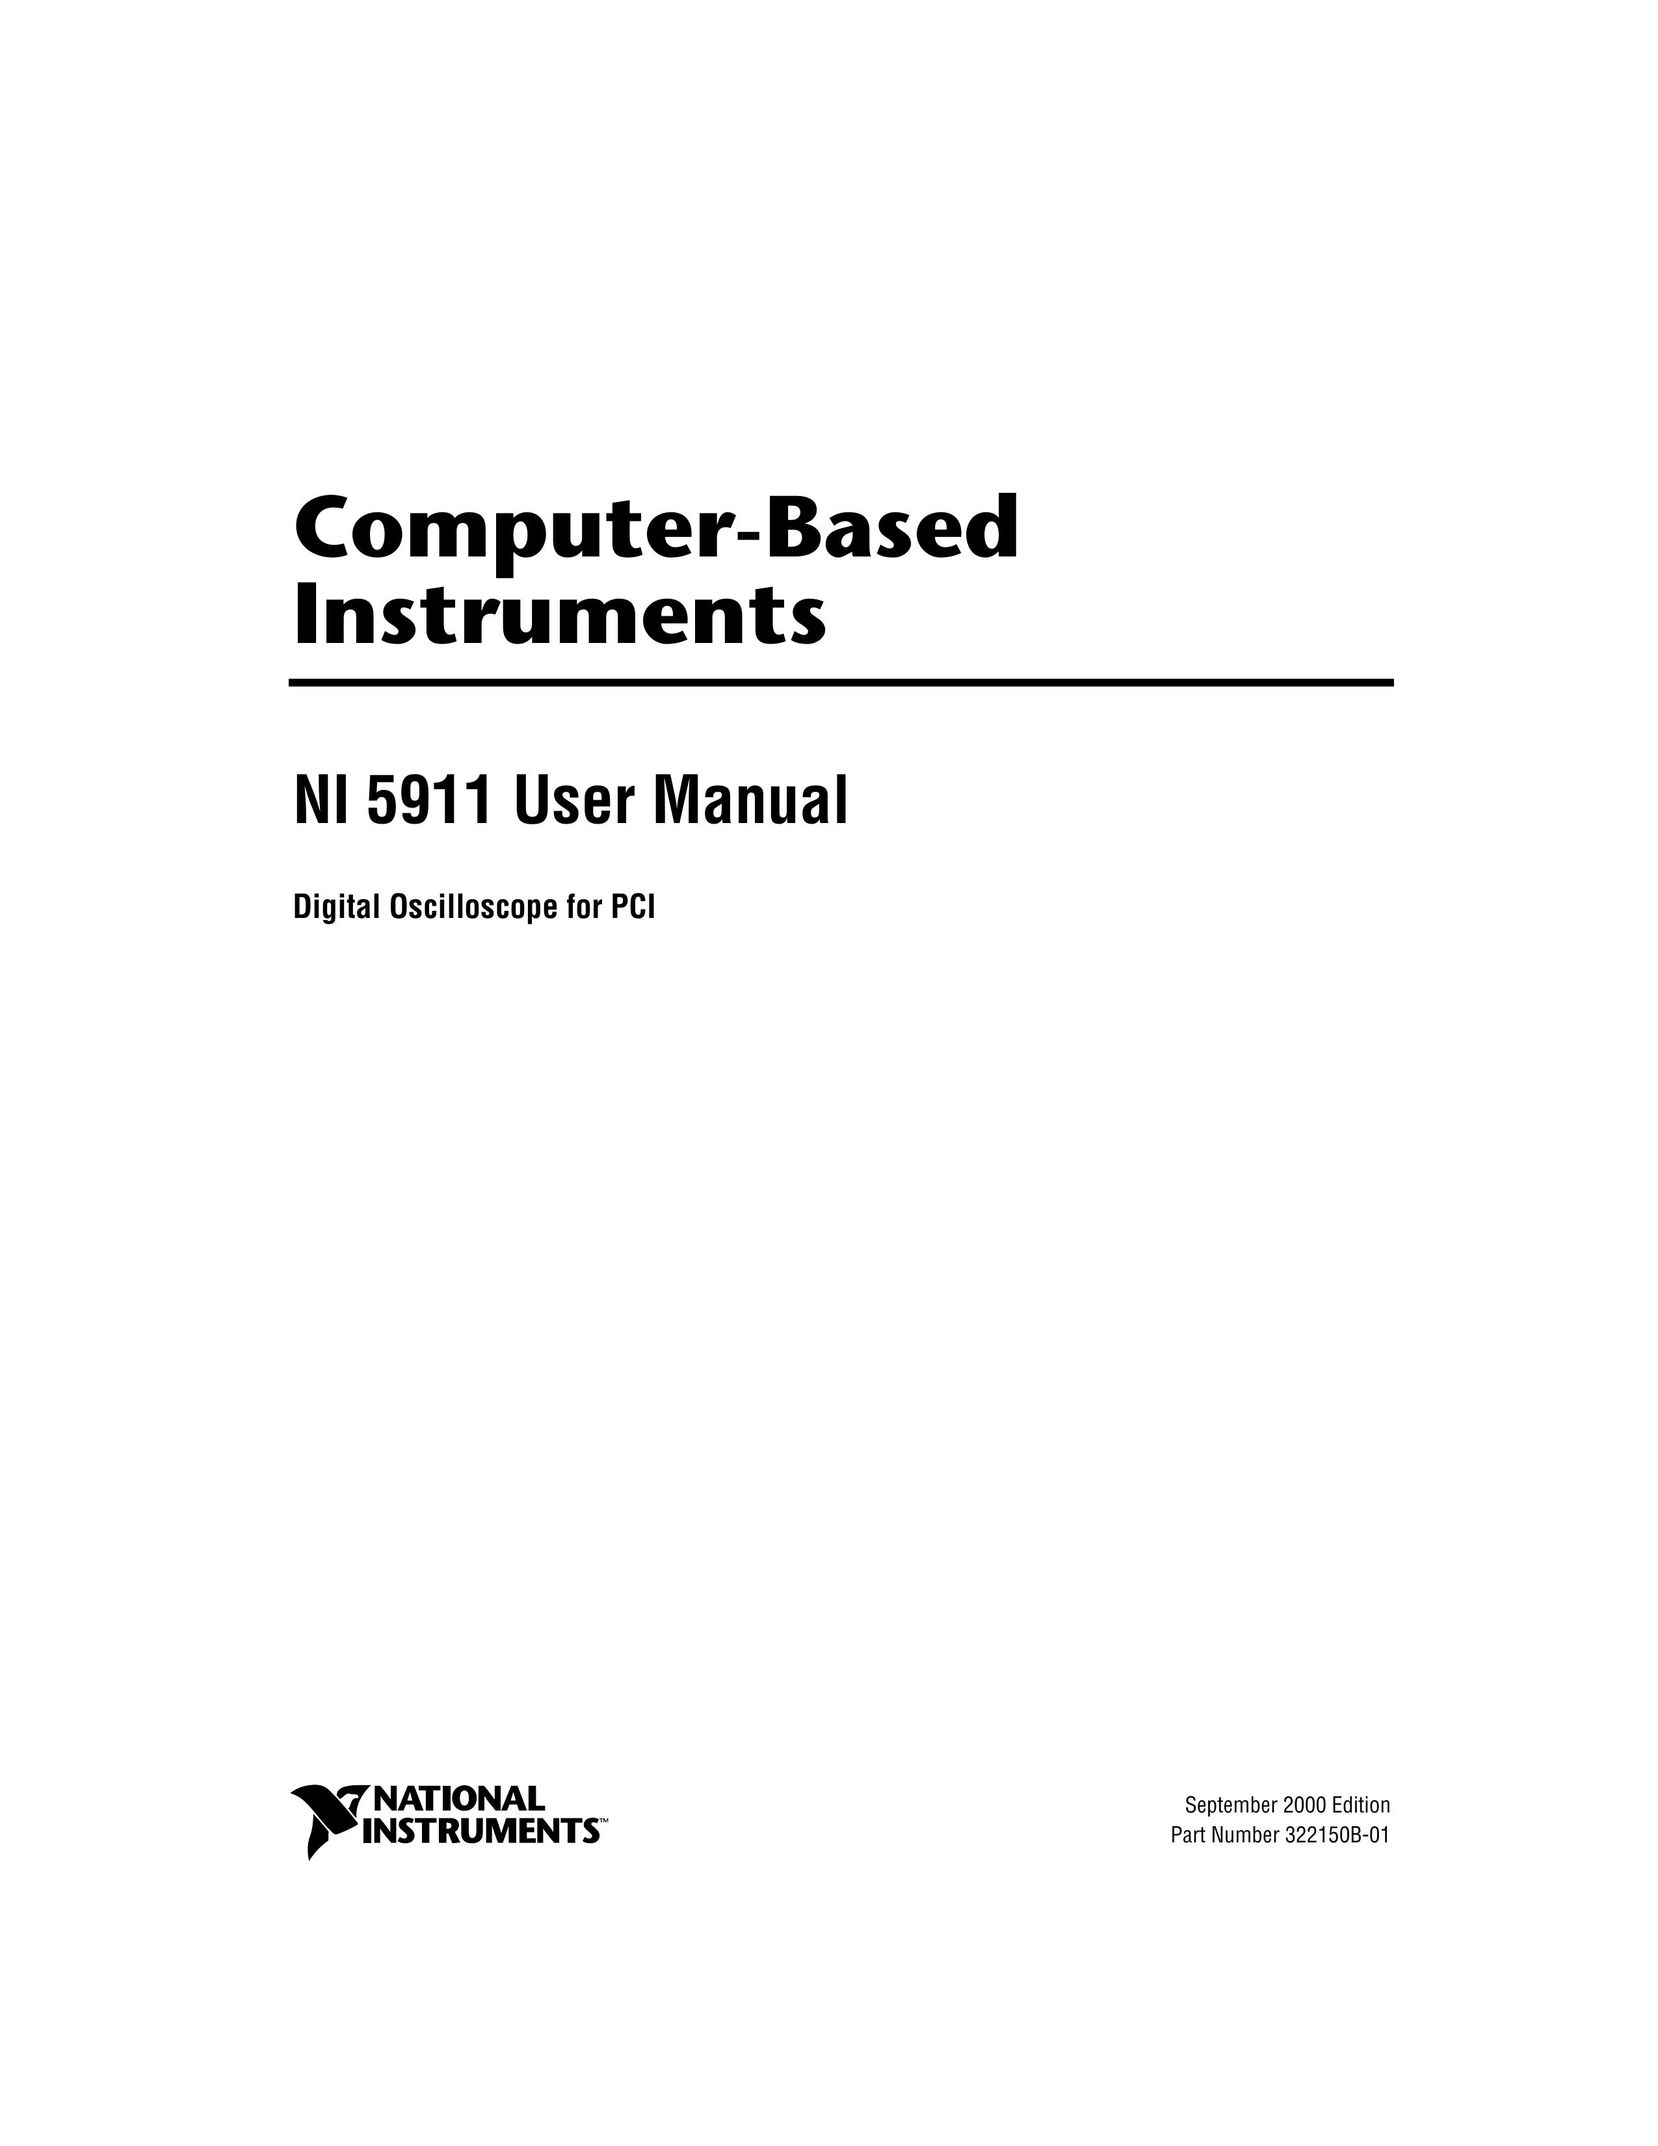 National Instruments NI 5911 Computer Accessories User Manual